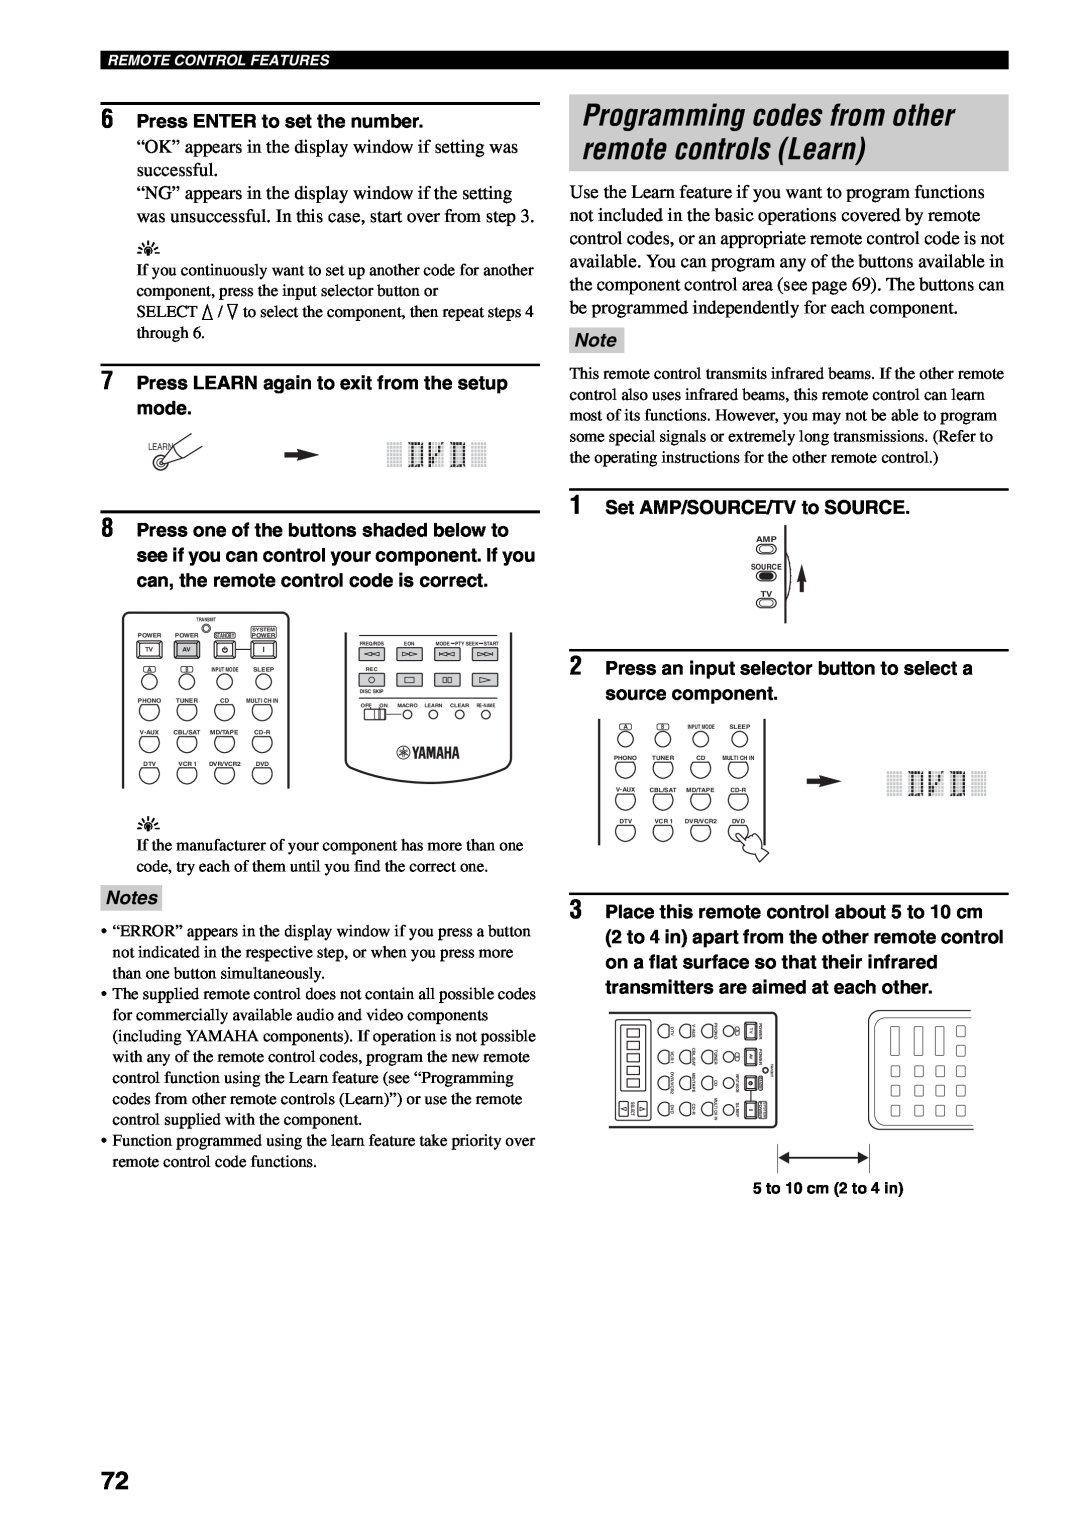 Yamaha RX-V2500 owner manual 6Press ENTER to set the number, 7Press LEARN again to exit from the setup mode, Notes 